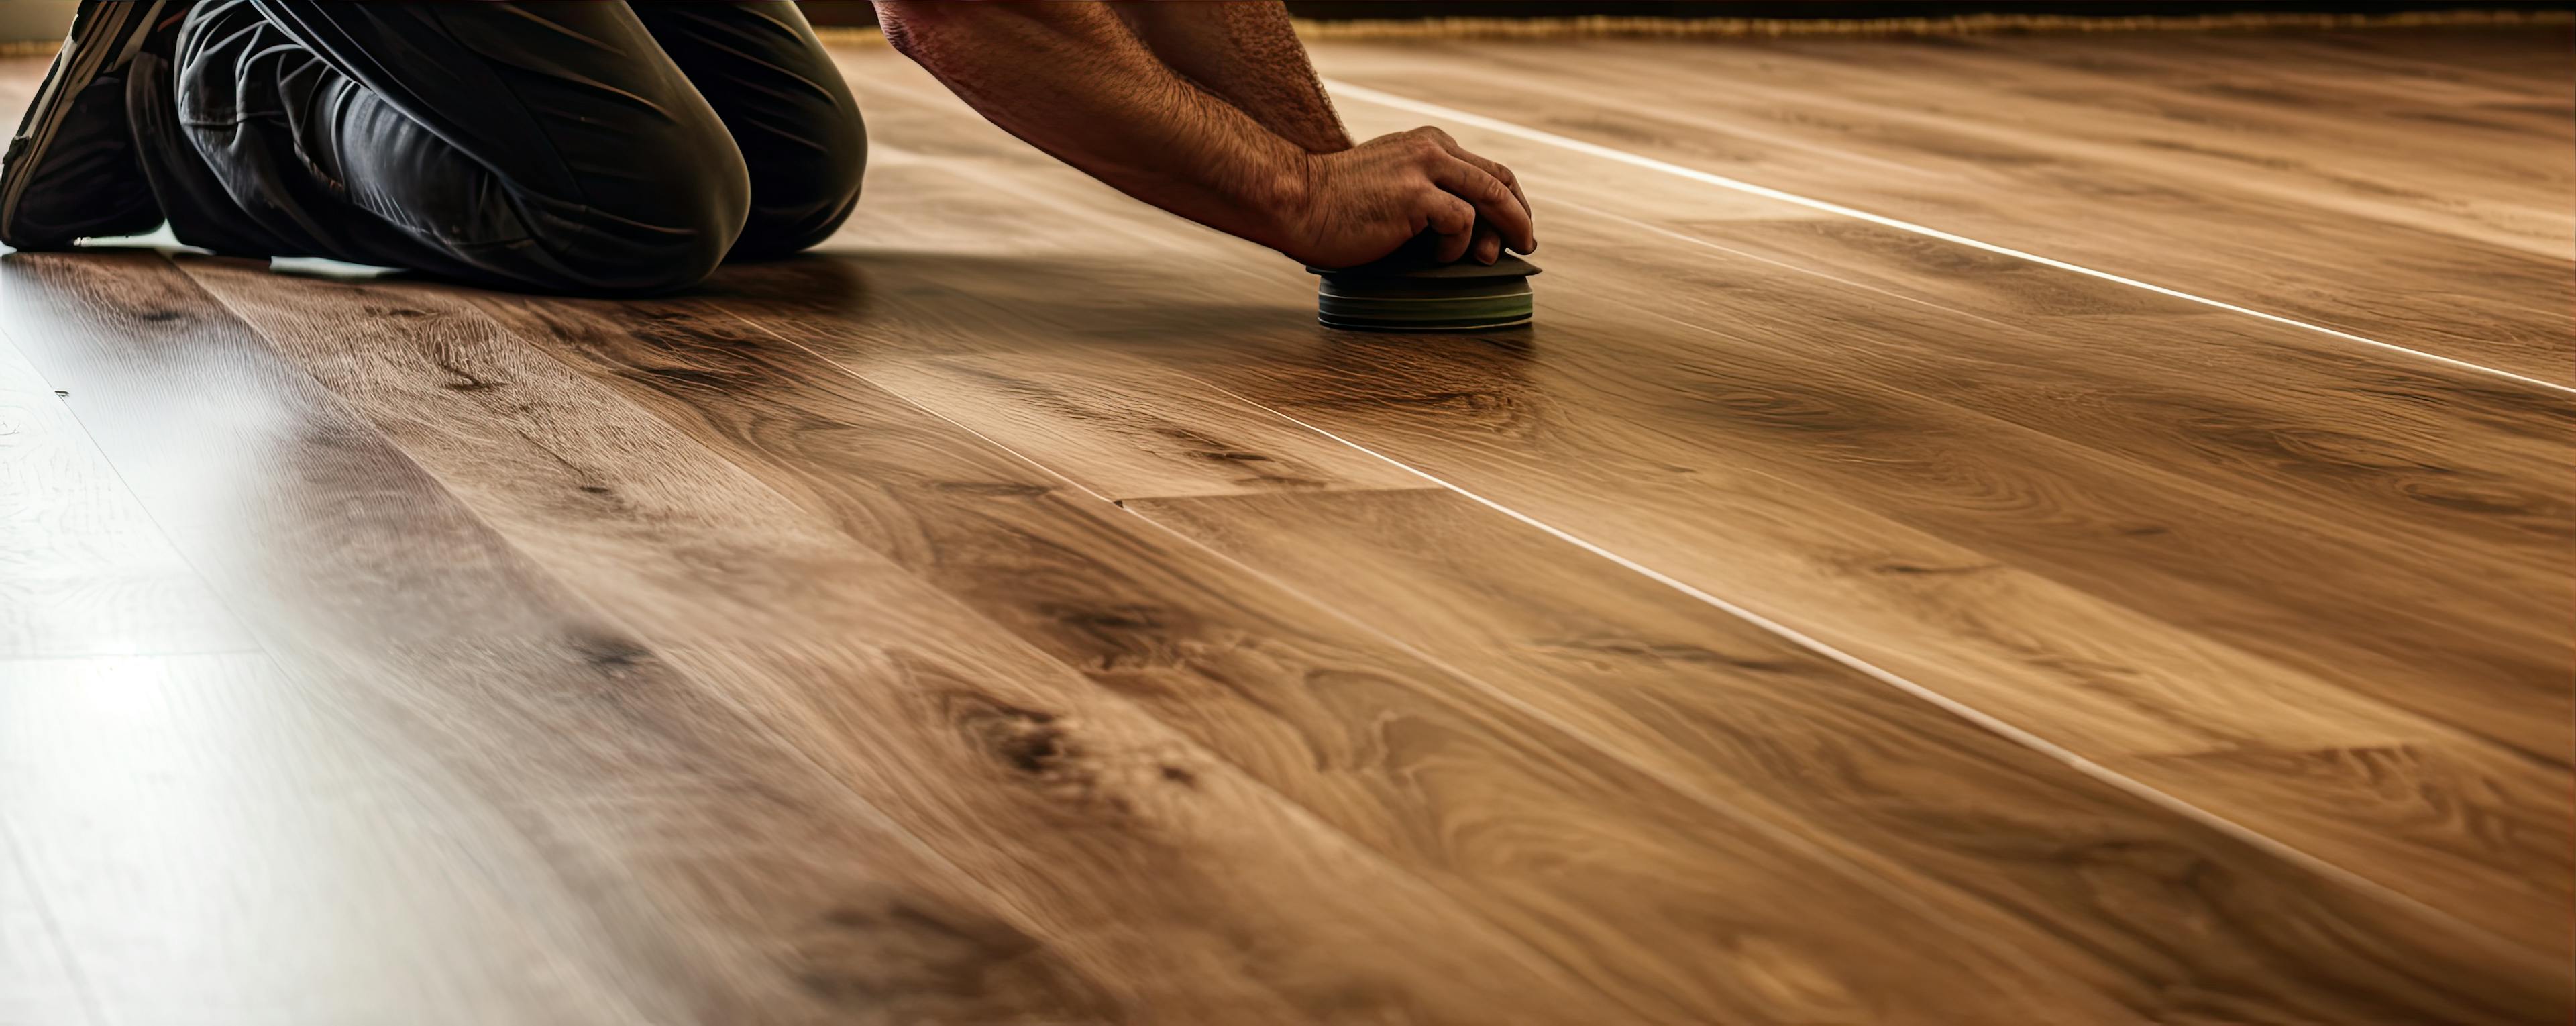 Stock image of flooring being laid